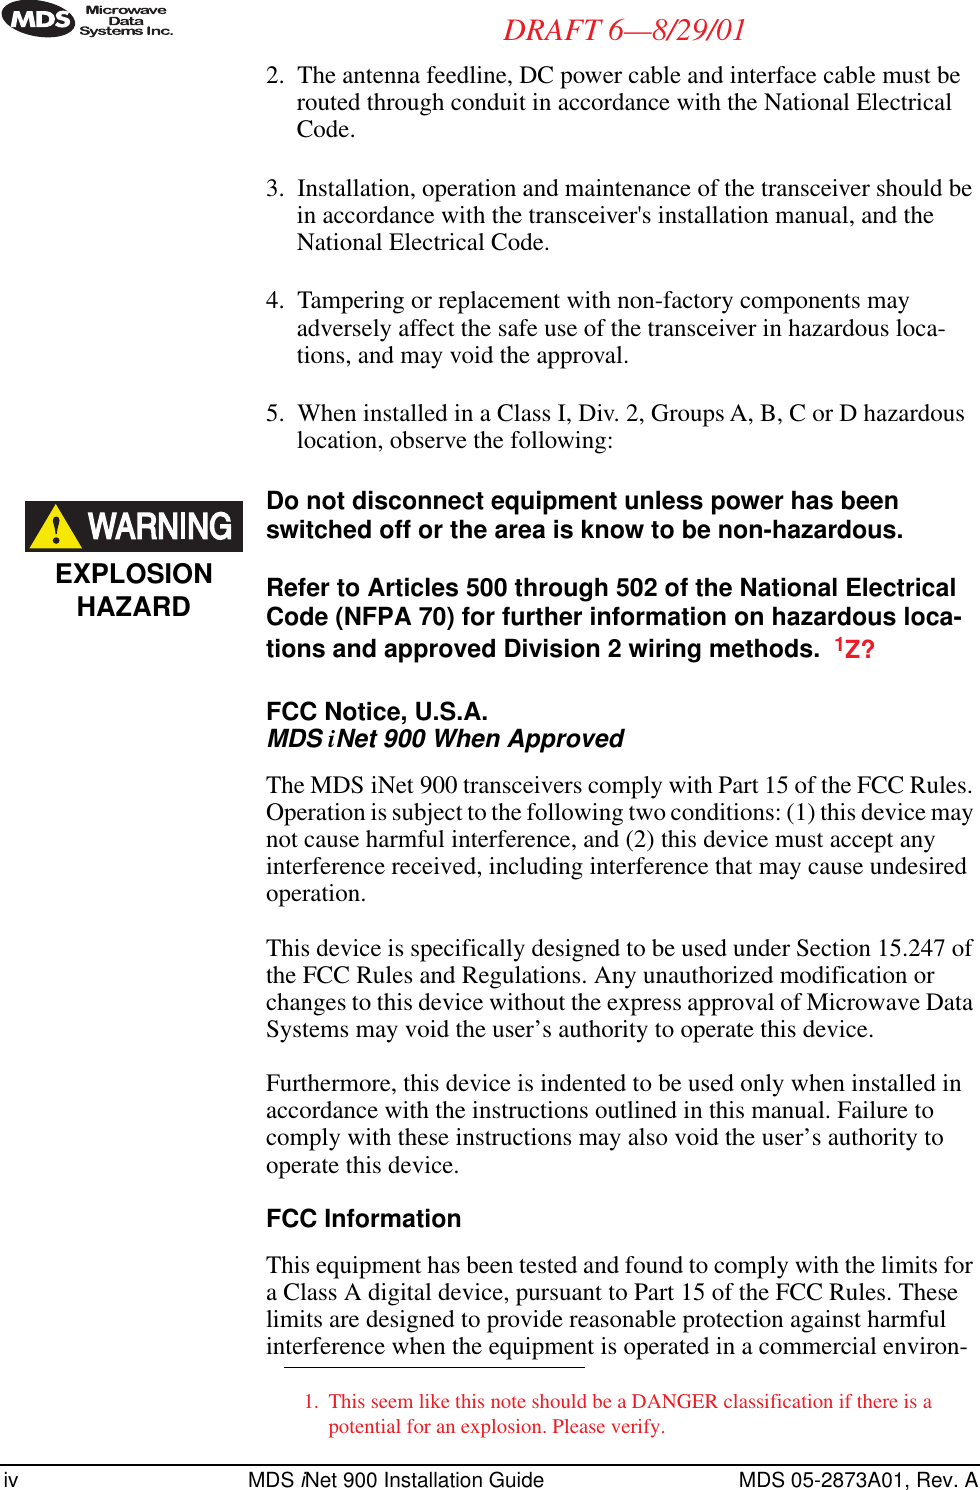  iv MDS  i Net 900 Installation Guide MDS 05-2873A01, Rev. A DRAFT 6—8/29/01 2. The antenna feedline, DC power cable and interface cable must be routed through conduit in accordance with the National Electrical Code.3. Installation, operation and maintenance of the transceiver should be in accordance with the transceiver&apos;s installation manual, and the National Electrical Code.4. Tampering or replacement with non-factory components may adversely affect the safe use of the transceiver in hazardous loca-tions, and may void the approval.5. When installed in a Class I, Div. 2, Groups A, B, C or D hazardous location, observe the following:  Do not disconnect equipment unless power has been switched off or the area is know to be non-hazardous.Refer to Articles 500 through 502 of the National Electrical Code (NFPA 70) for further information on hazardous loca-tions and approved Division 2 wiring methods.   1 Z?FCC Notice, U.S.A. MDS  i Net 900 When Approved The MDS iNet 900 transceivers comply with Part 15 of the FCC Rules. Operation is subject to the following two conditions: (1) this device may not cause harmful interference, and (2) this device must accept any interference received, including interference that may cause undesired operation.This device is specifically designed to be used under Section 15.247 of the FCC Rules and Regulations. Any unauthorized modification or changes to this device without the express approval of Microwave Data Systems may void the user’s authority to operate this device.Furthermore, this device is indented to be used only when installed in accordance with the instructions outlined in this manual. Failure to comply with these instructions may also void the user’s authority to operate this device. FCC Information This equipment has been tested and found to comply with the limits for a Class A digital device, pursuant to Part 15 of the FCC Rules. These limits are designed to provide reasonable protection against harmful interference when the equipment is operated in a commercial environ- 1. This seem like this note should be a DANGER classification if there is a potential for an explosion. Please verify.EXPLOSIONHAZARD